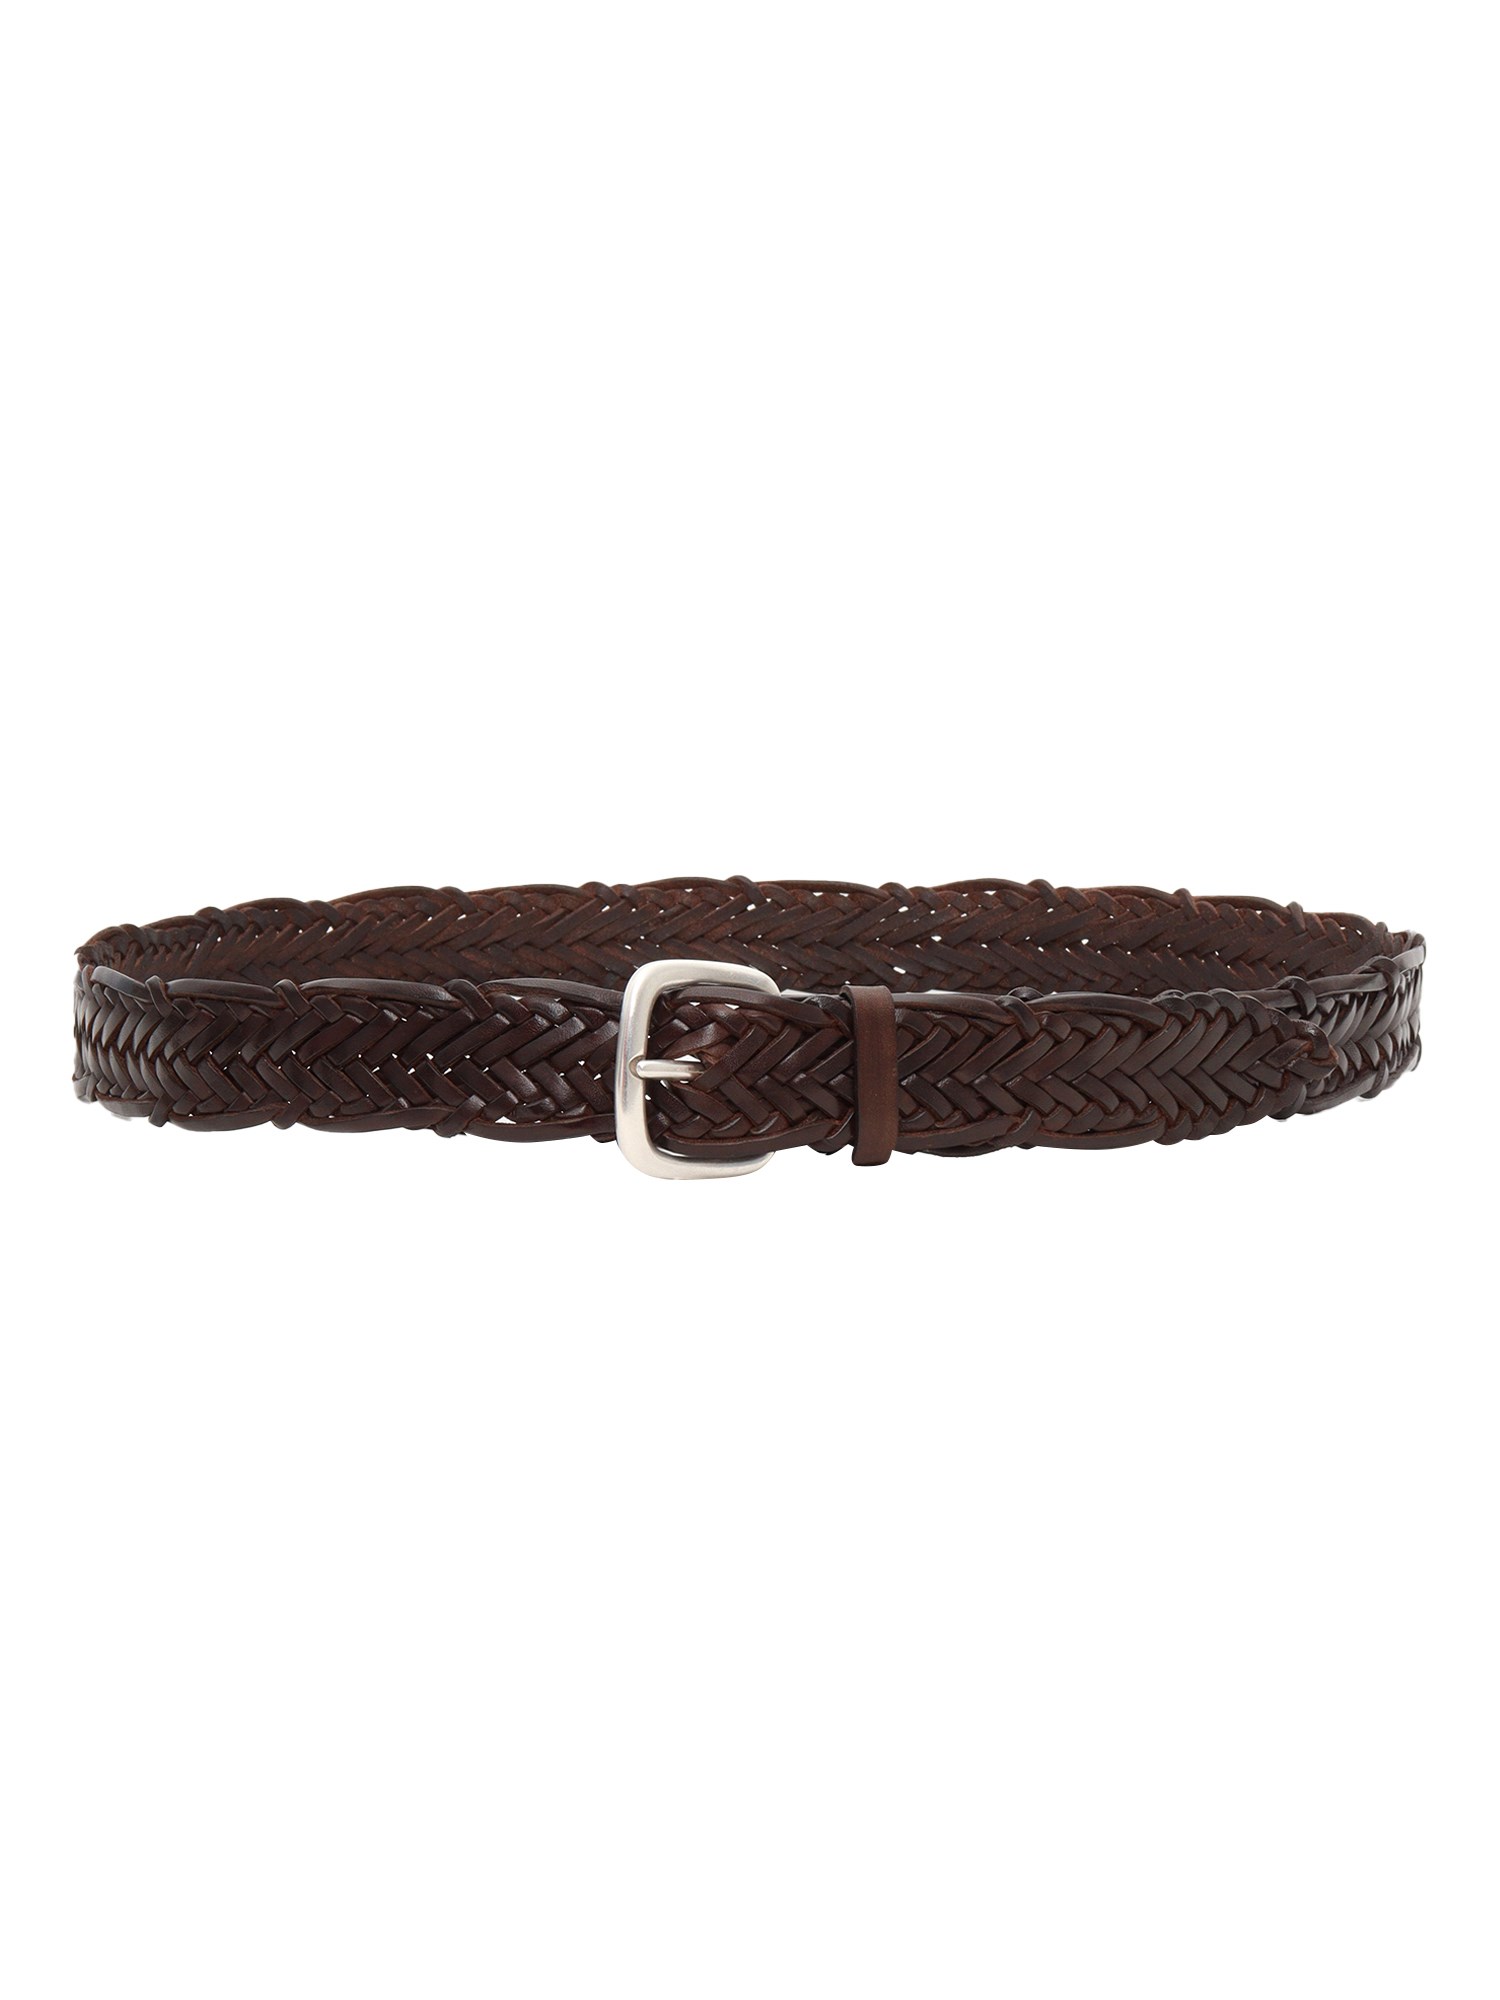 Orciani Brown Braided Belt